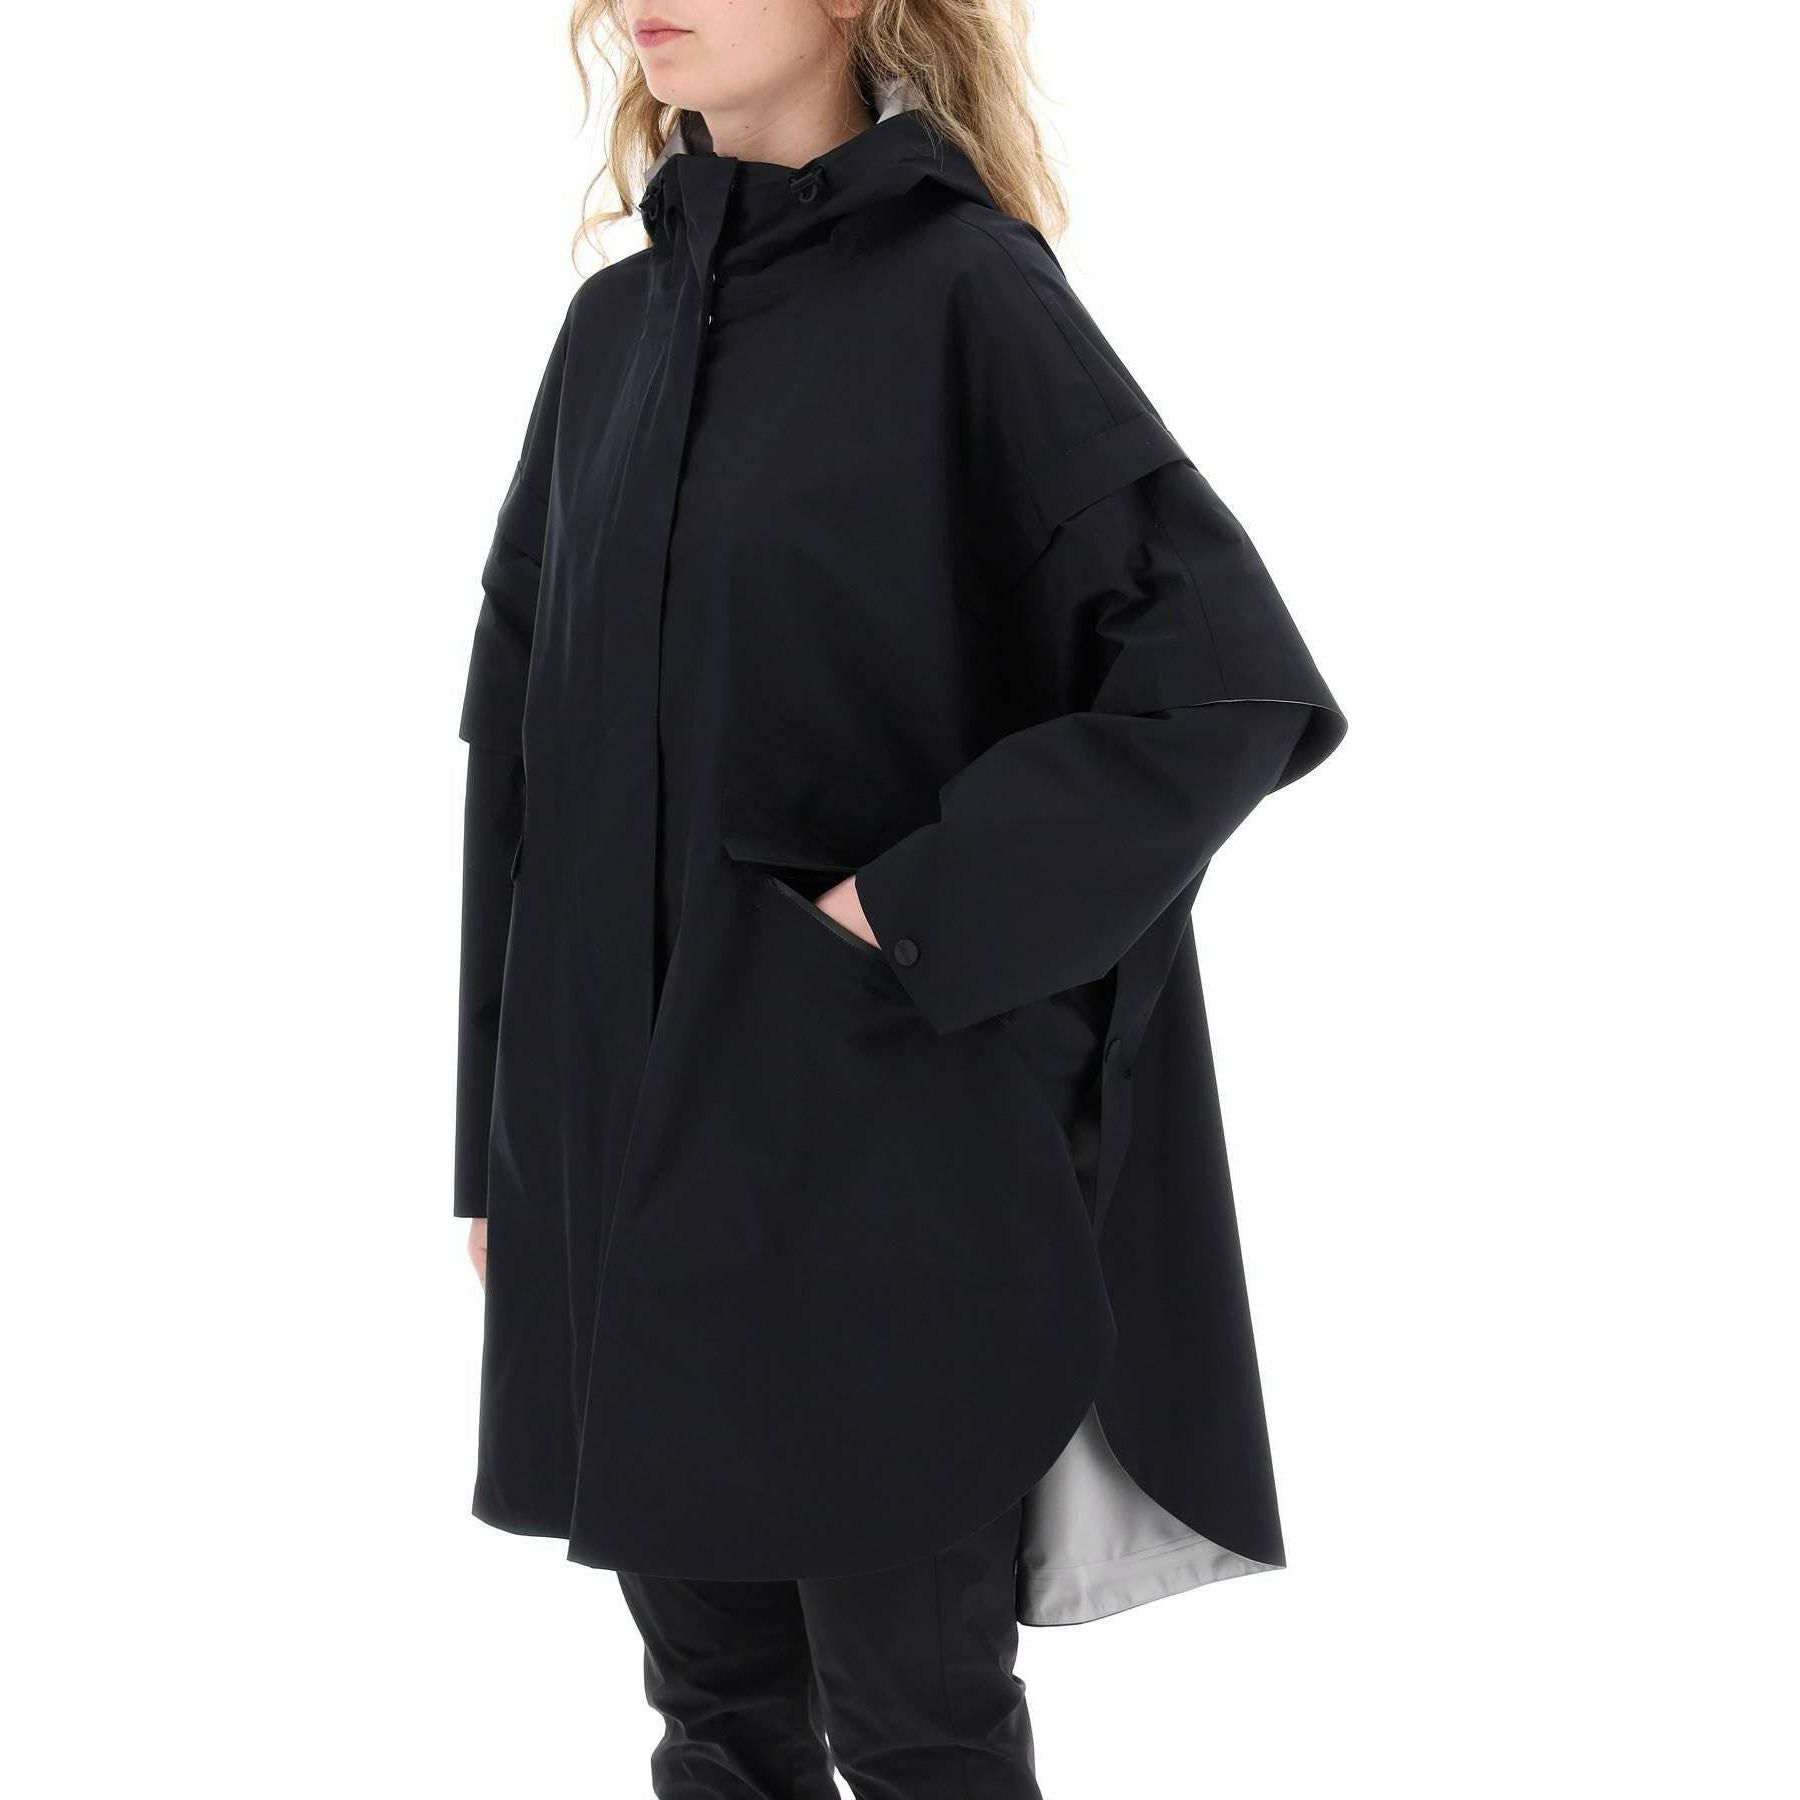 Black GORE-TEx Cape With Removable Sleeves HERNO LAMINAR JOHN JULIA.